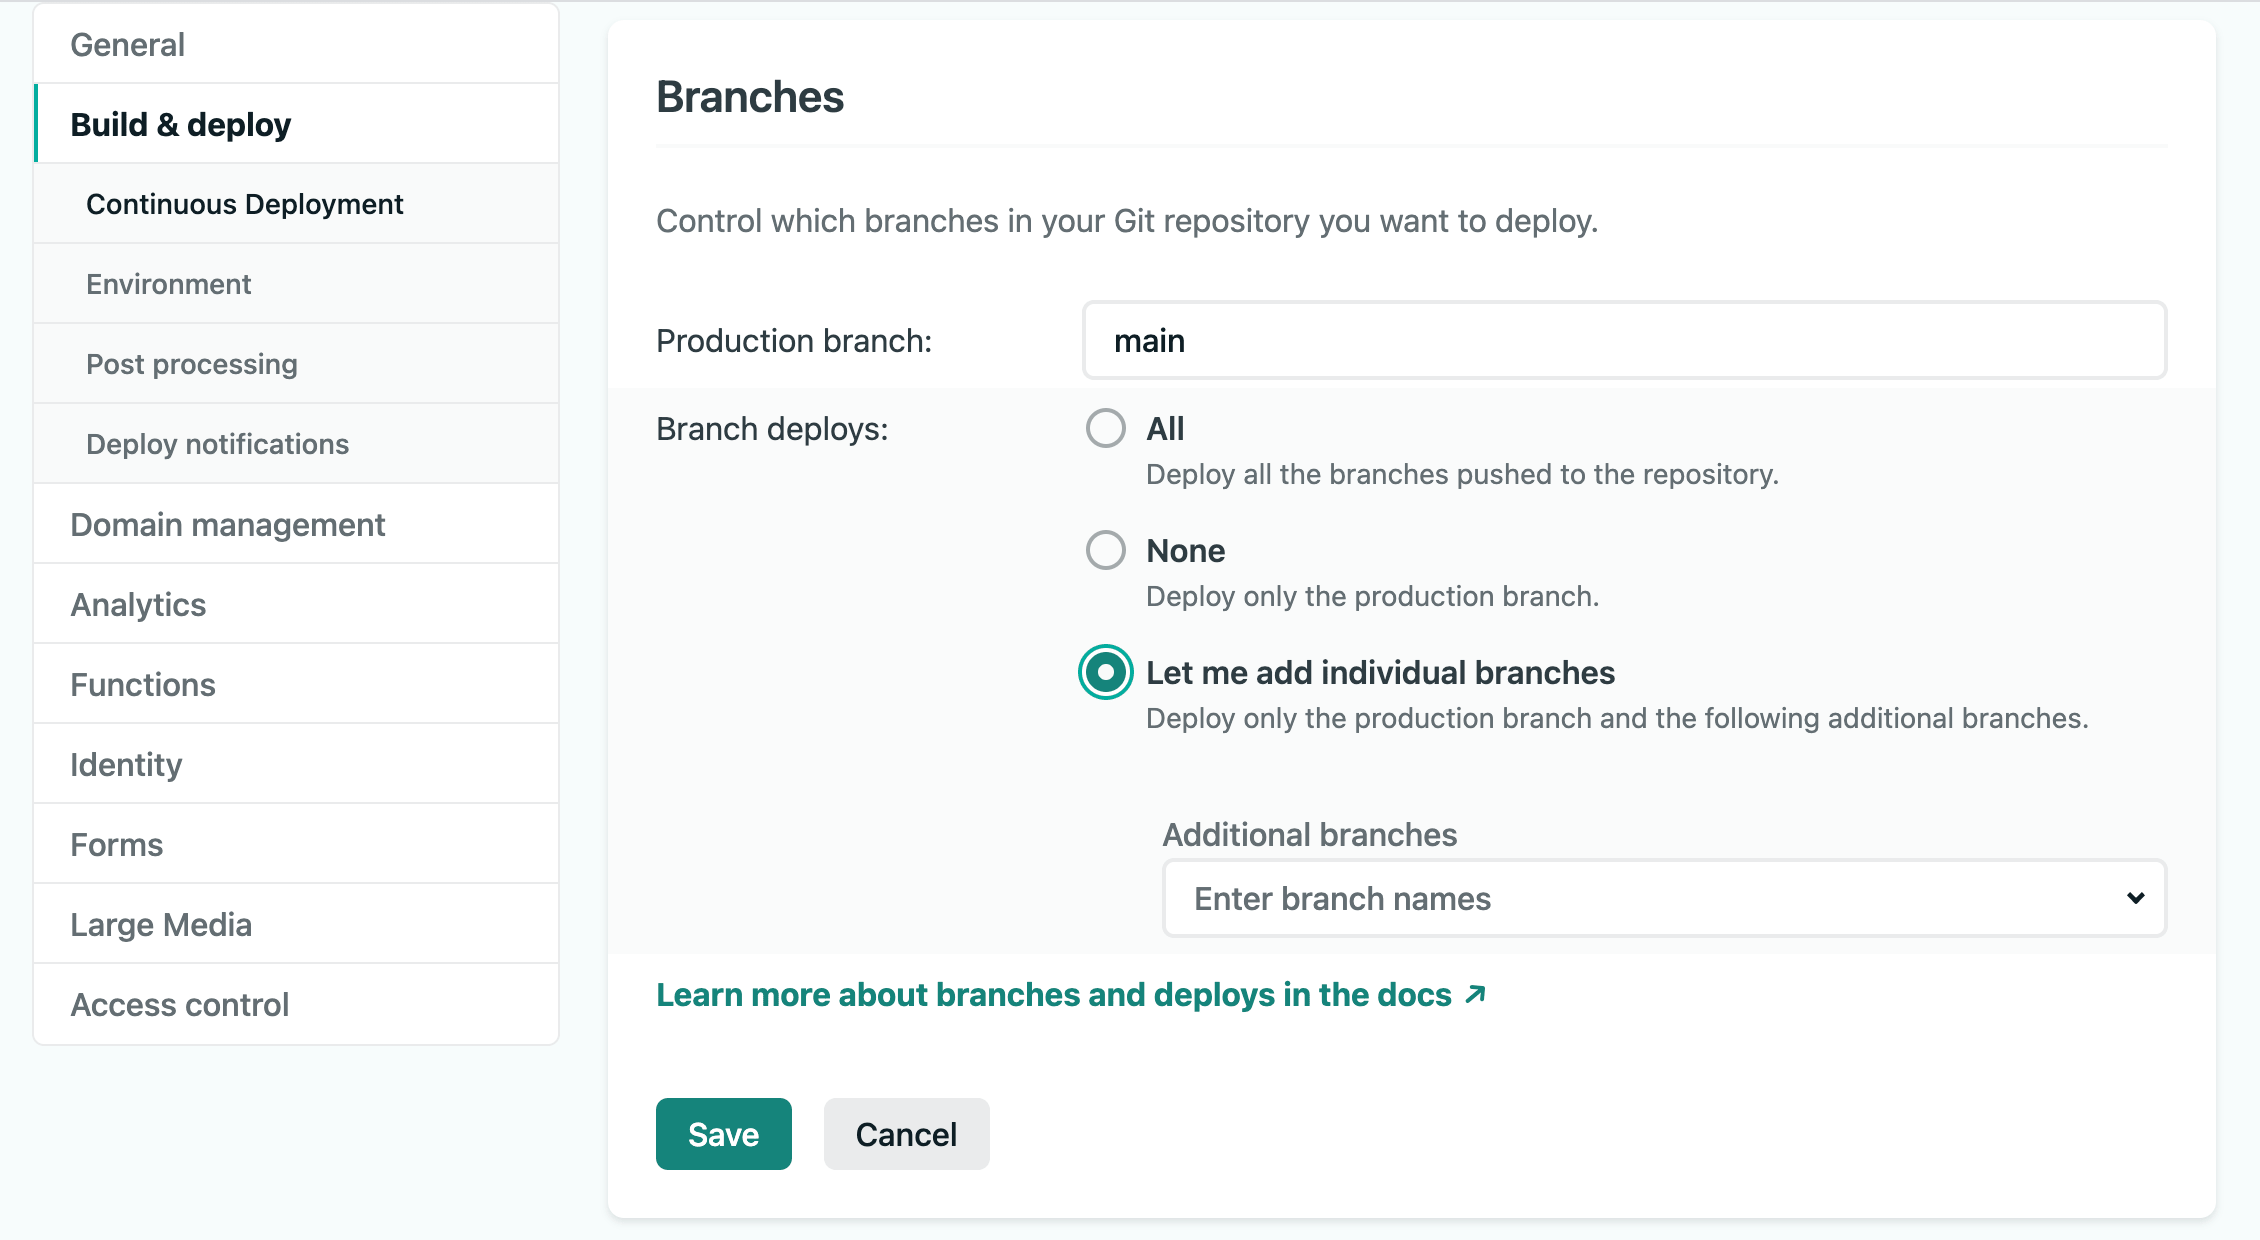 Configuring which branches get deployed in the Netlify Admin